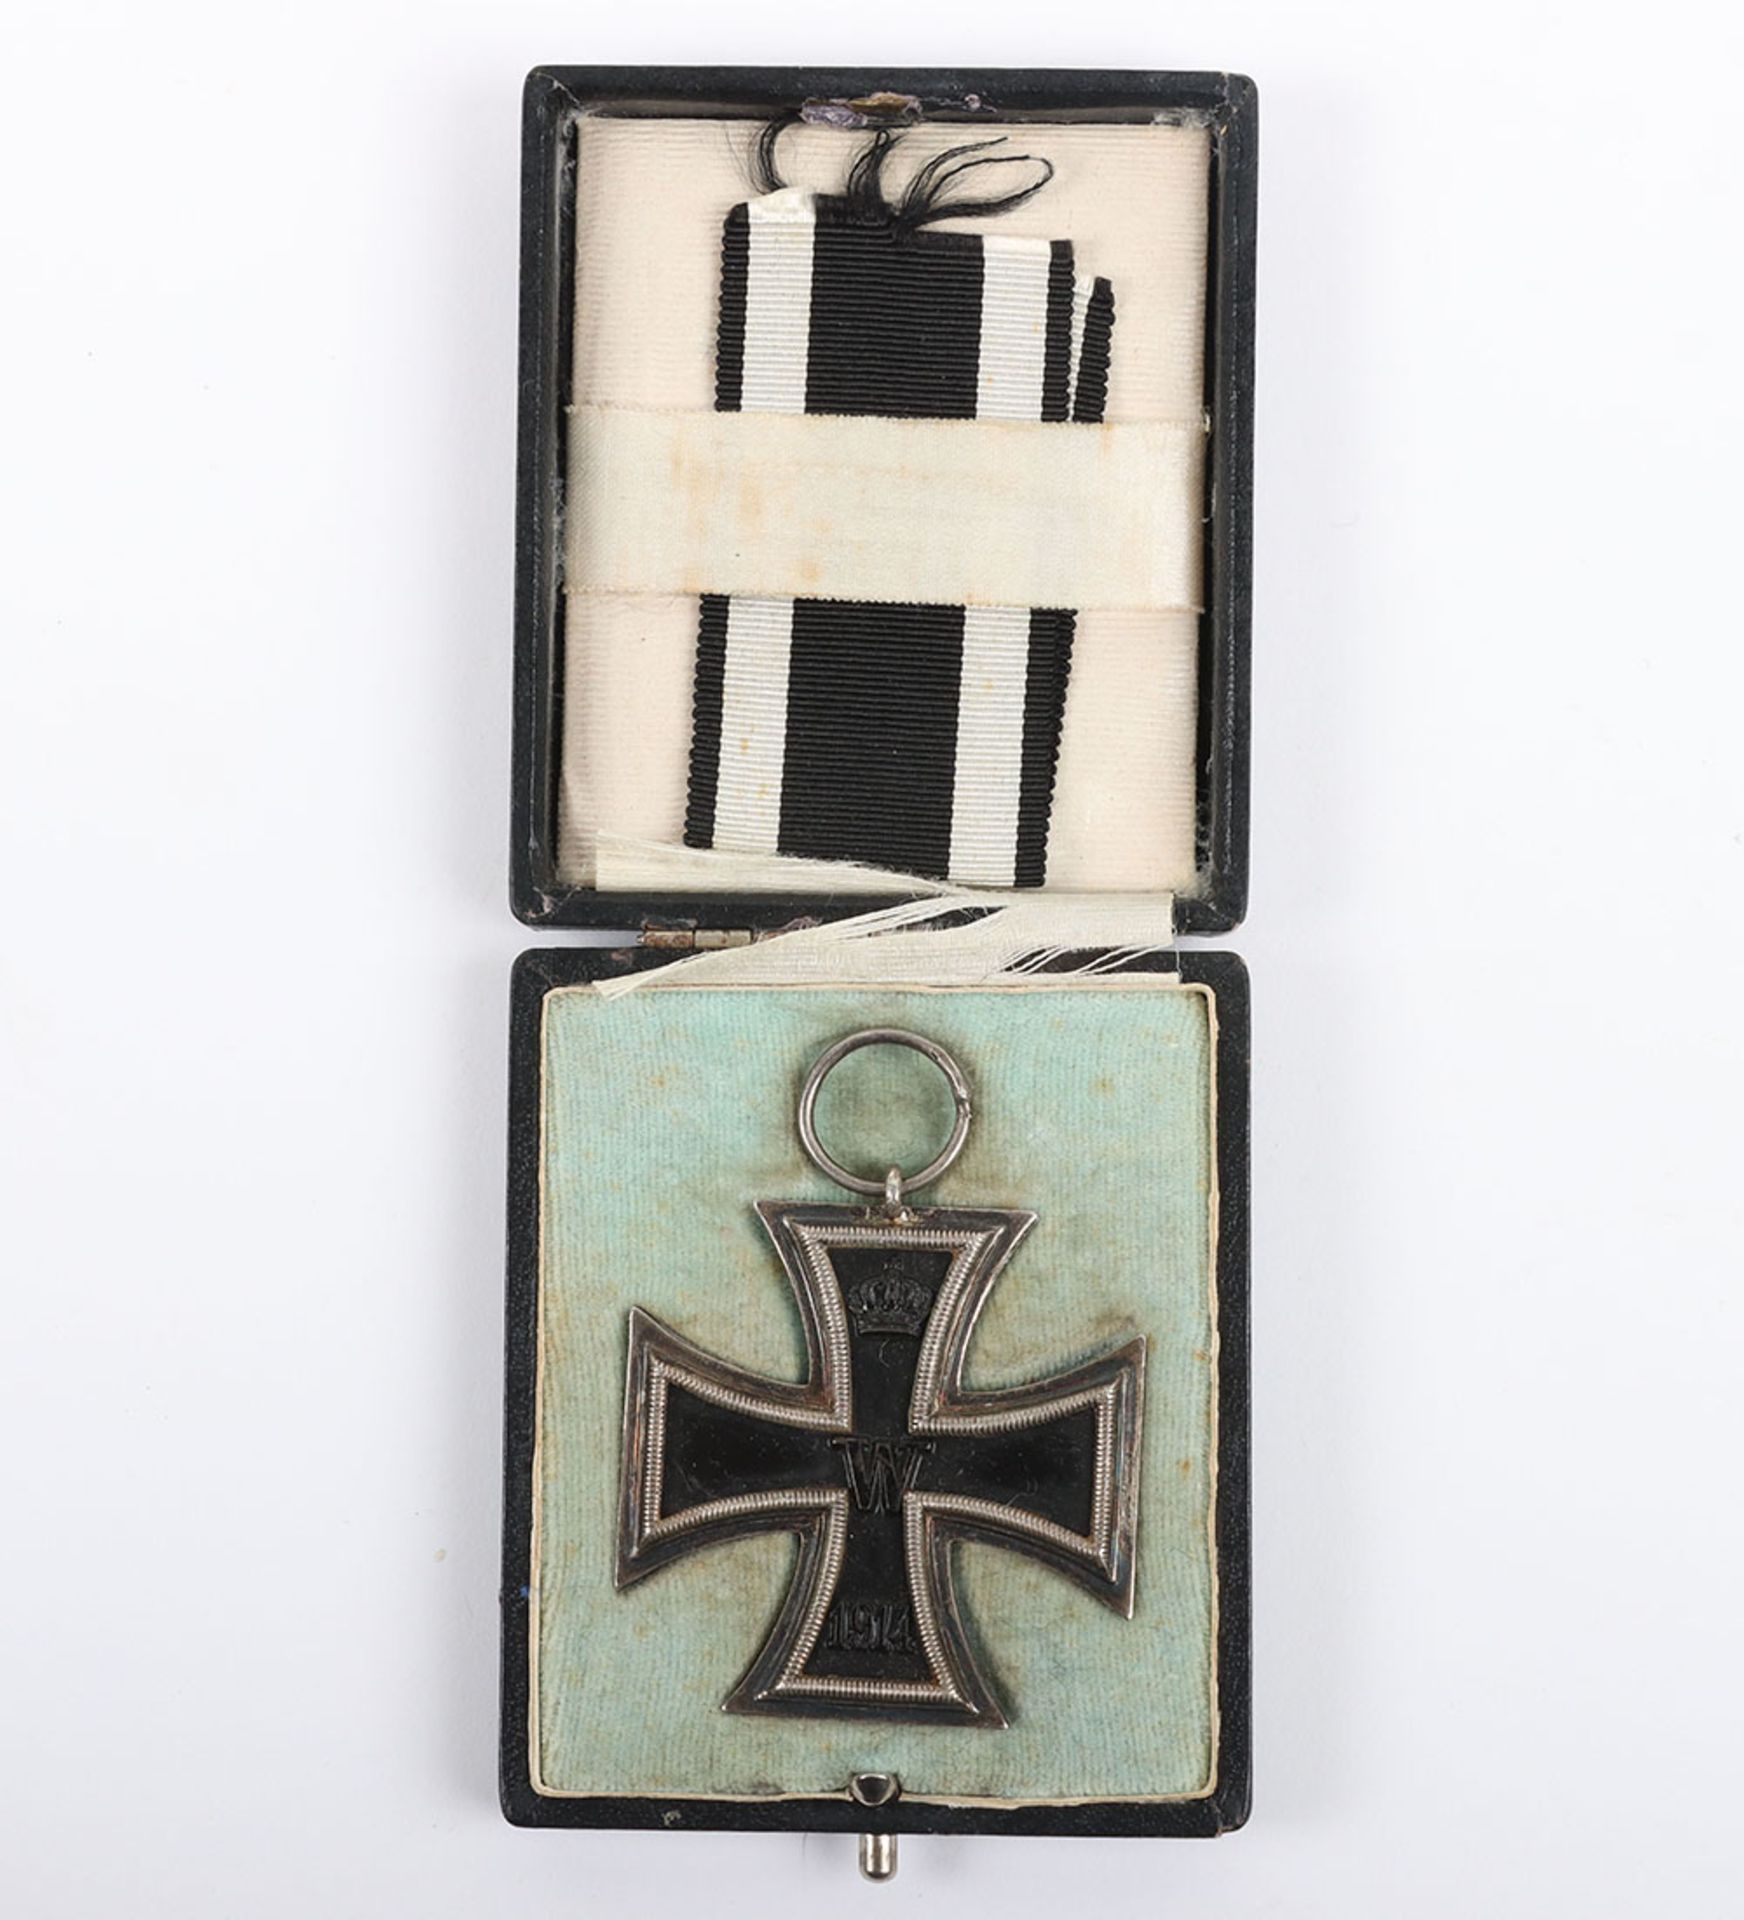 1914 Iron Cross 2nd Class with Presentation Case